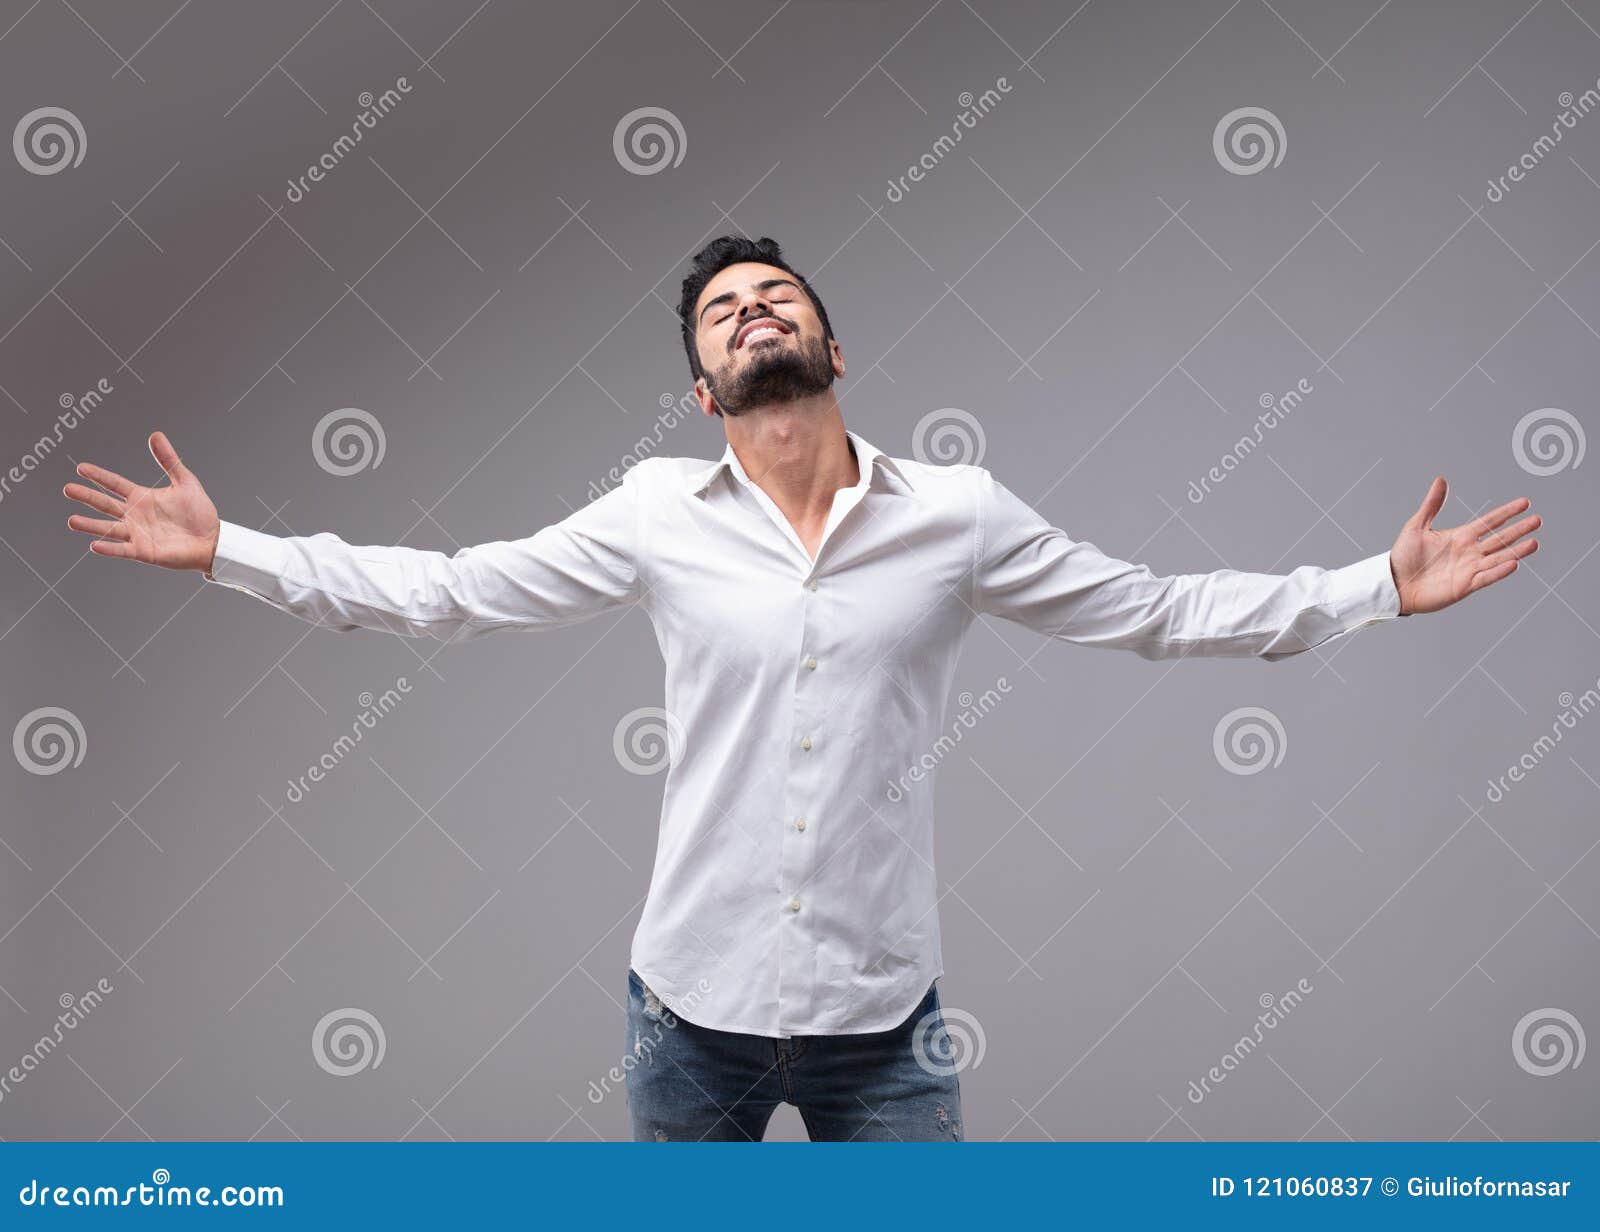 man showing relieved gesture with spread arms